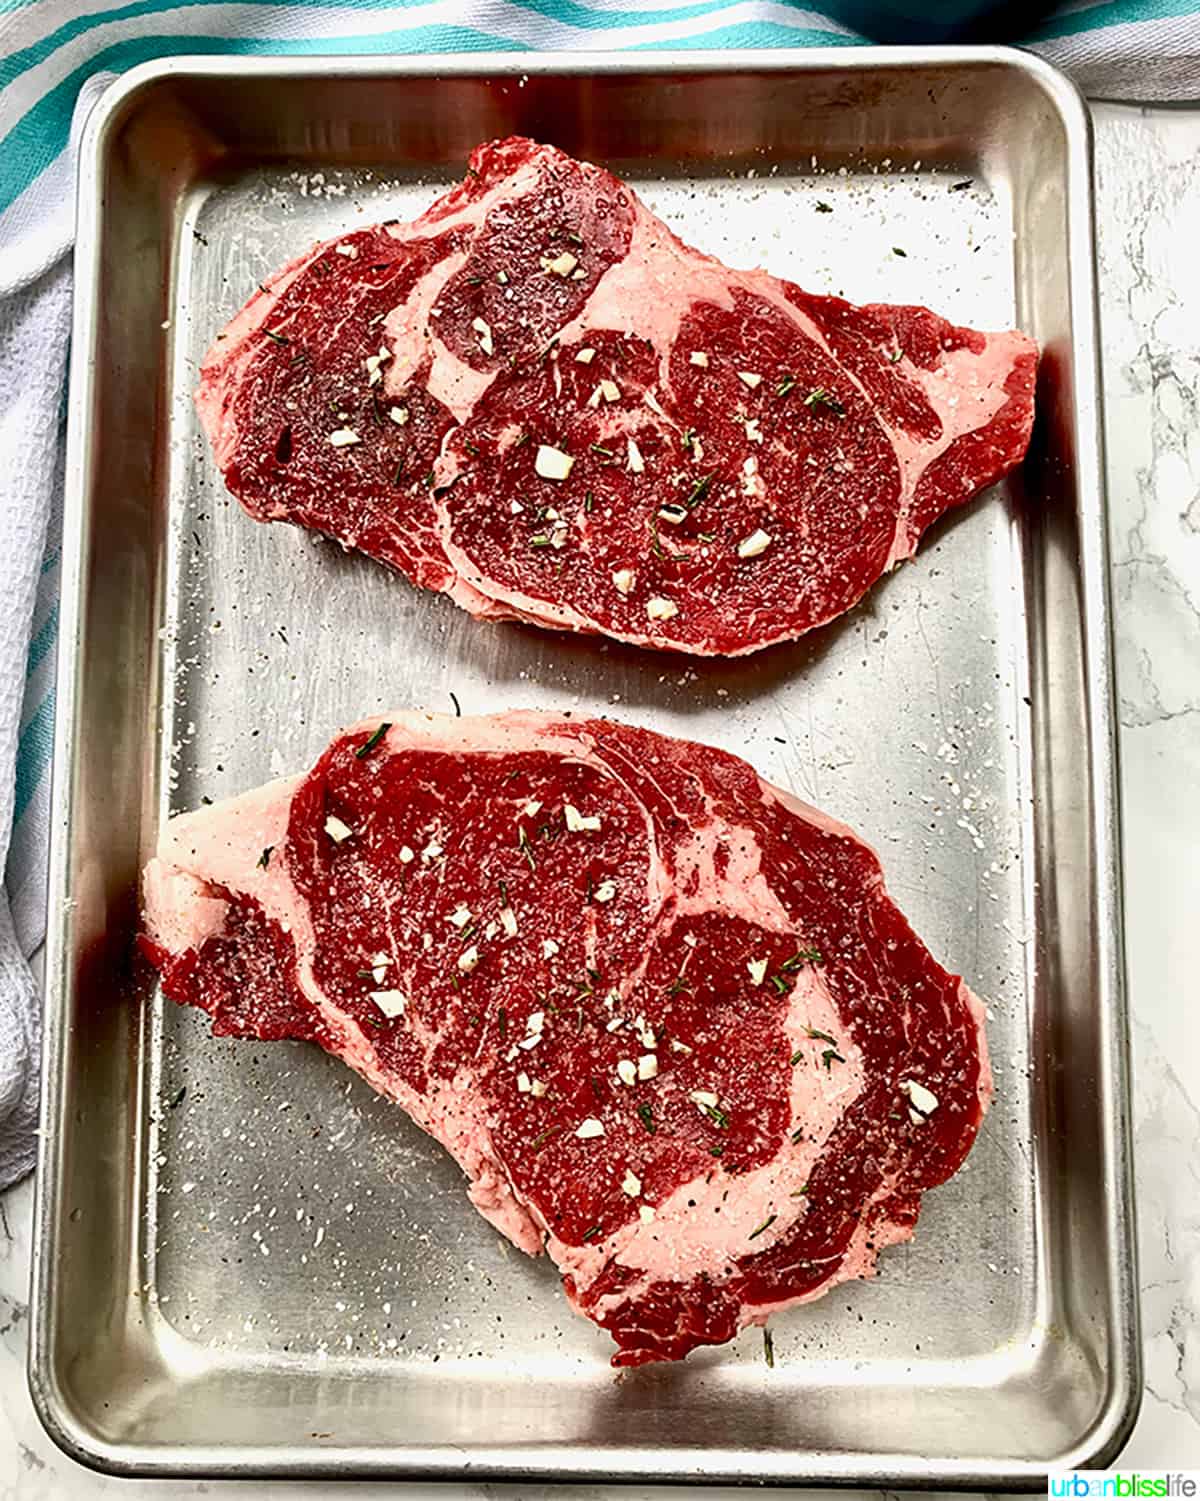 two rib eye steaks uncooked and seasoned on a metal dish.